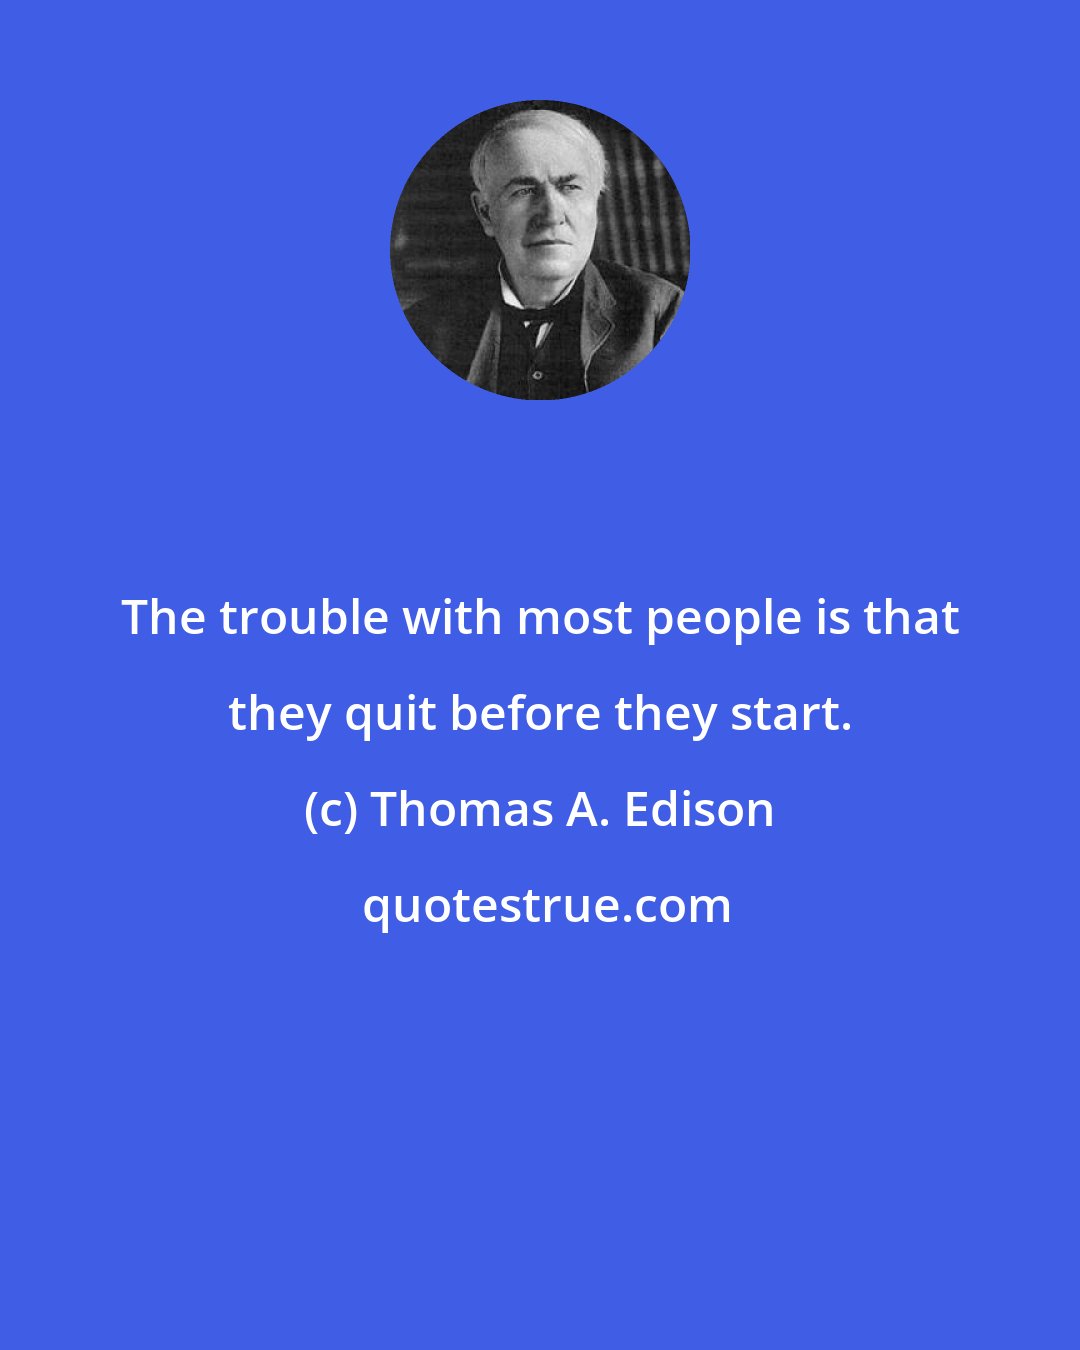 Thomas A. Edison: The trouble with most people is that they quit before they start.